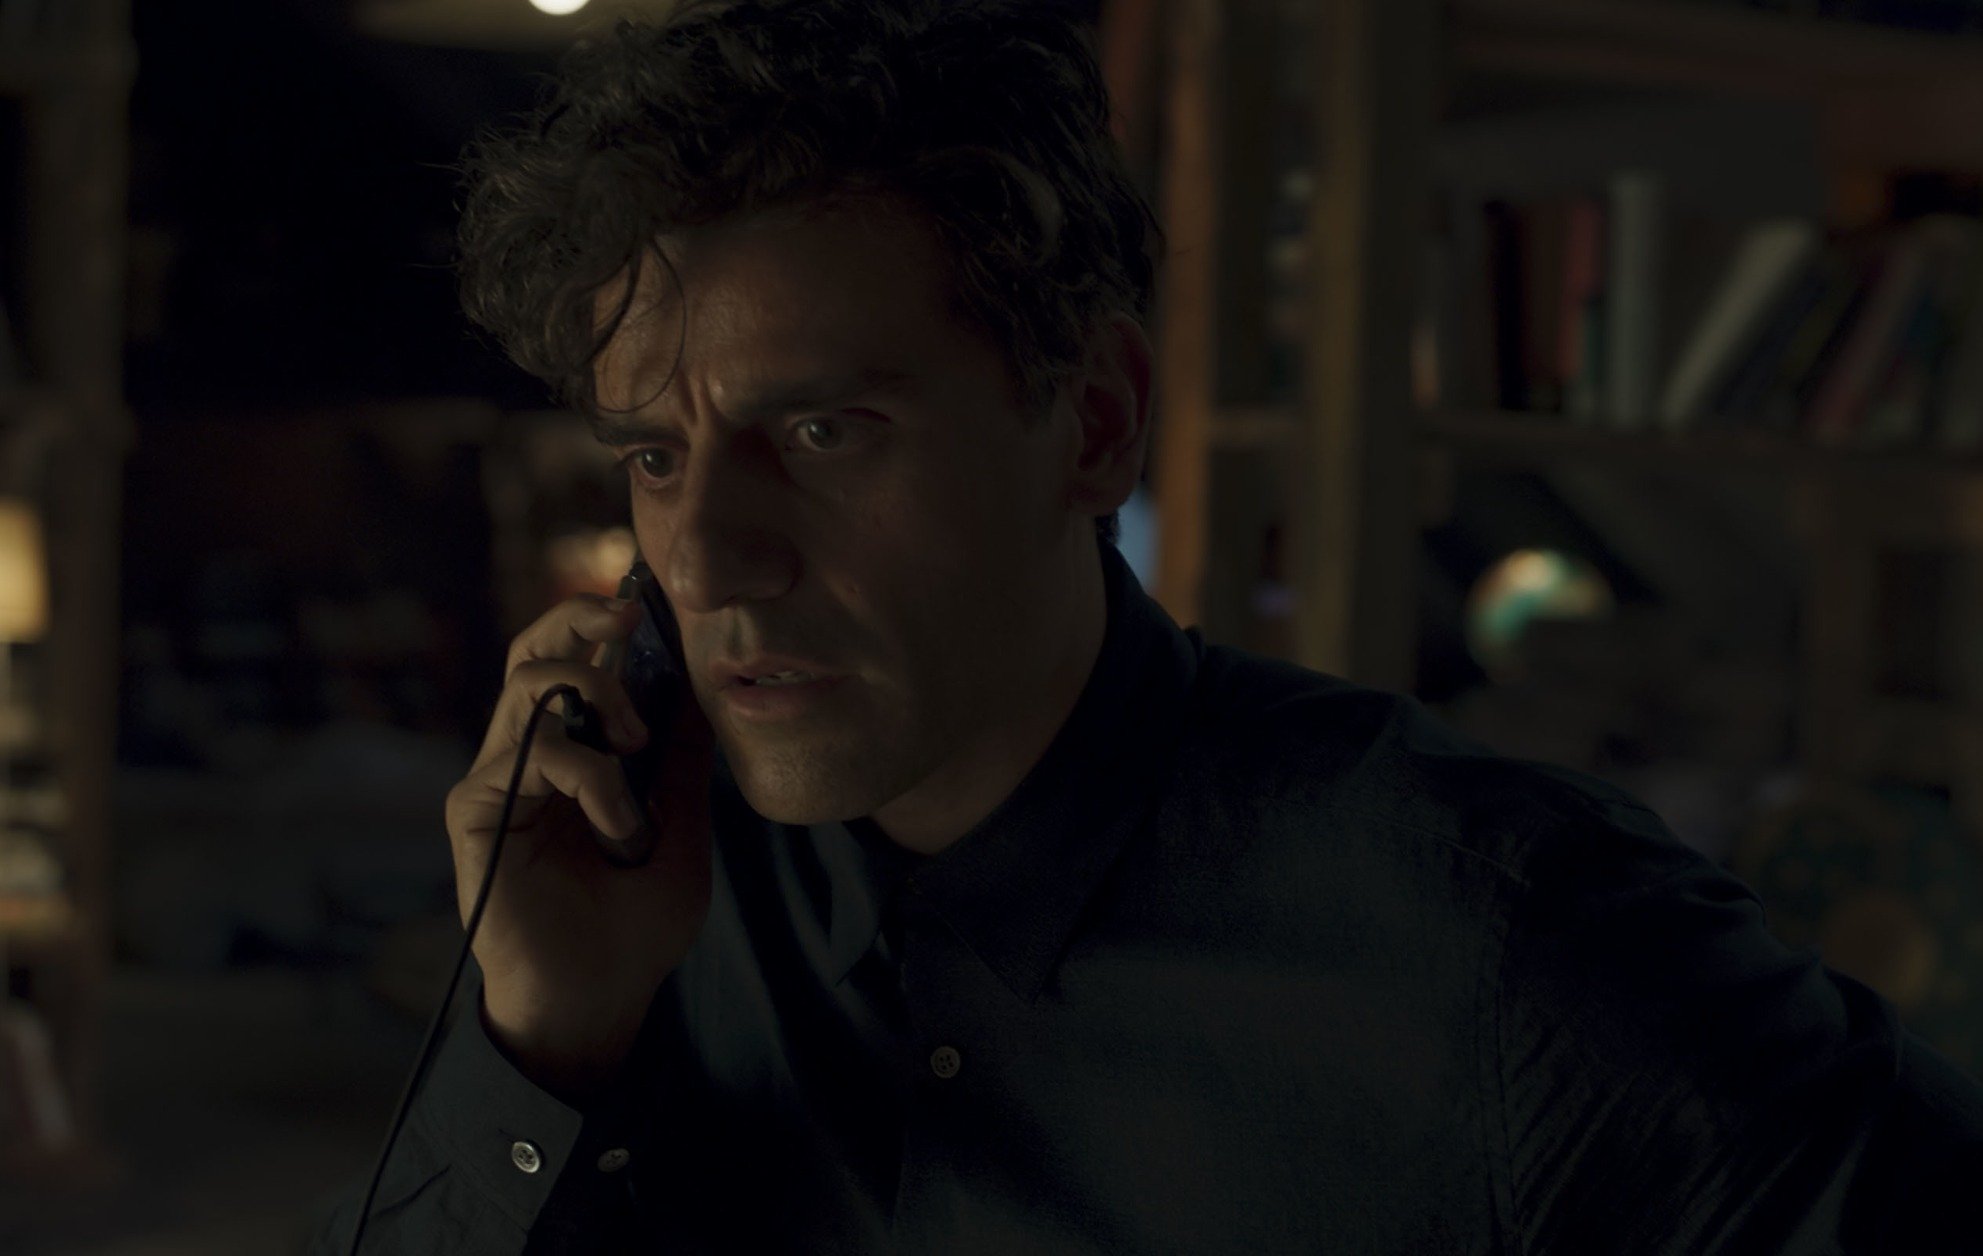 Oscar Isaac as Steven Grant in 'Moon Knight' Episode 1 on Disney+. He's talking on the phone and looks confused.